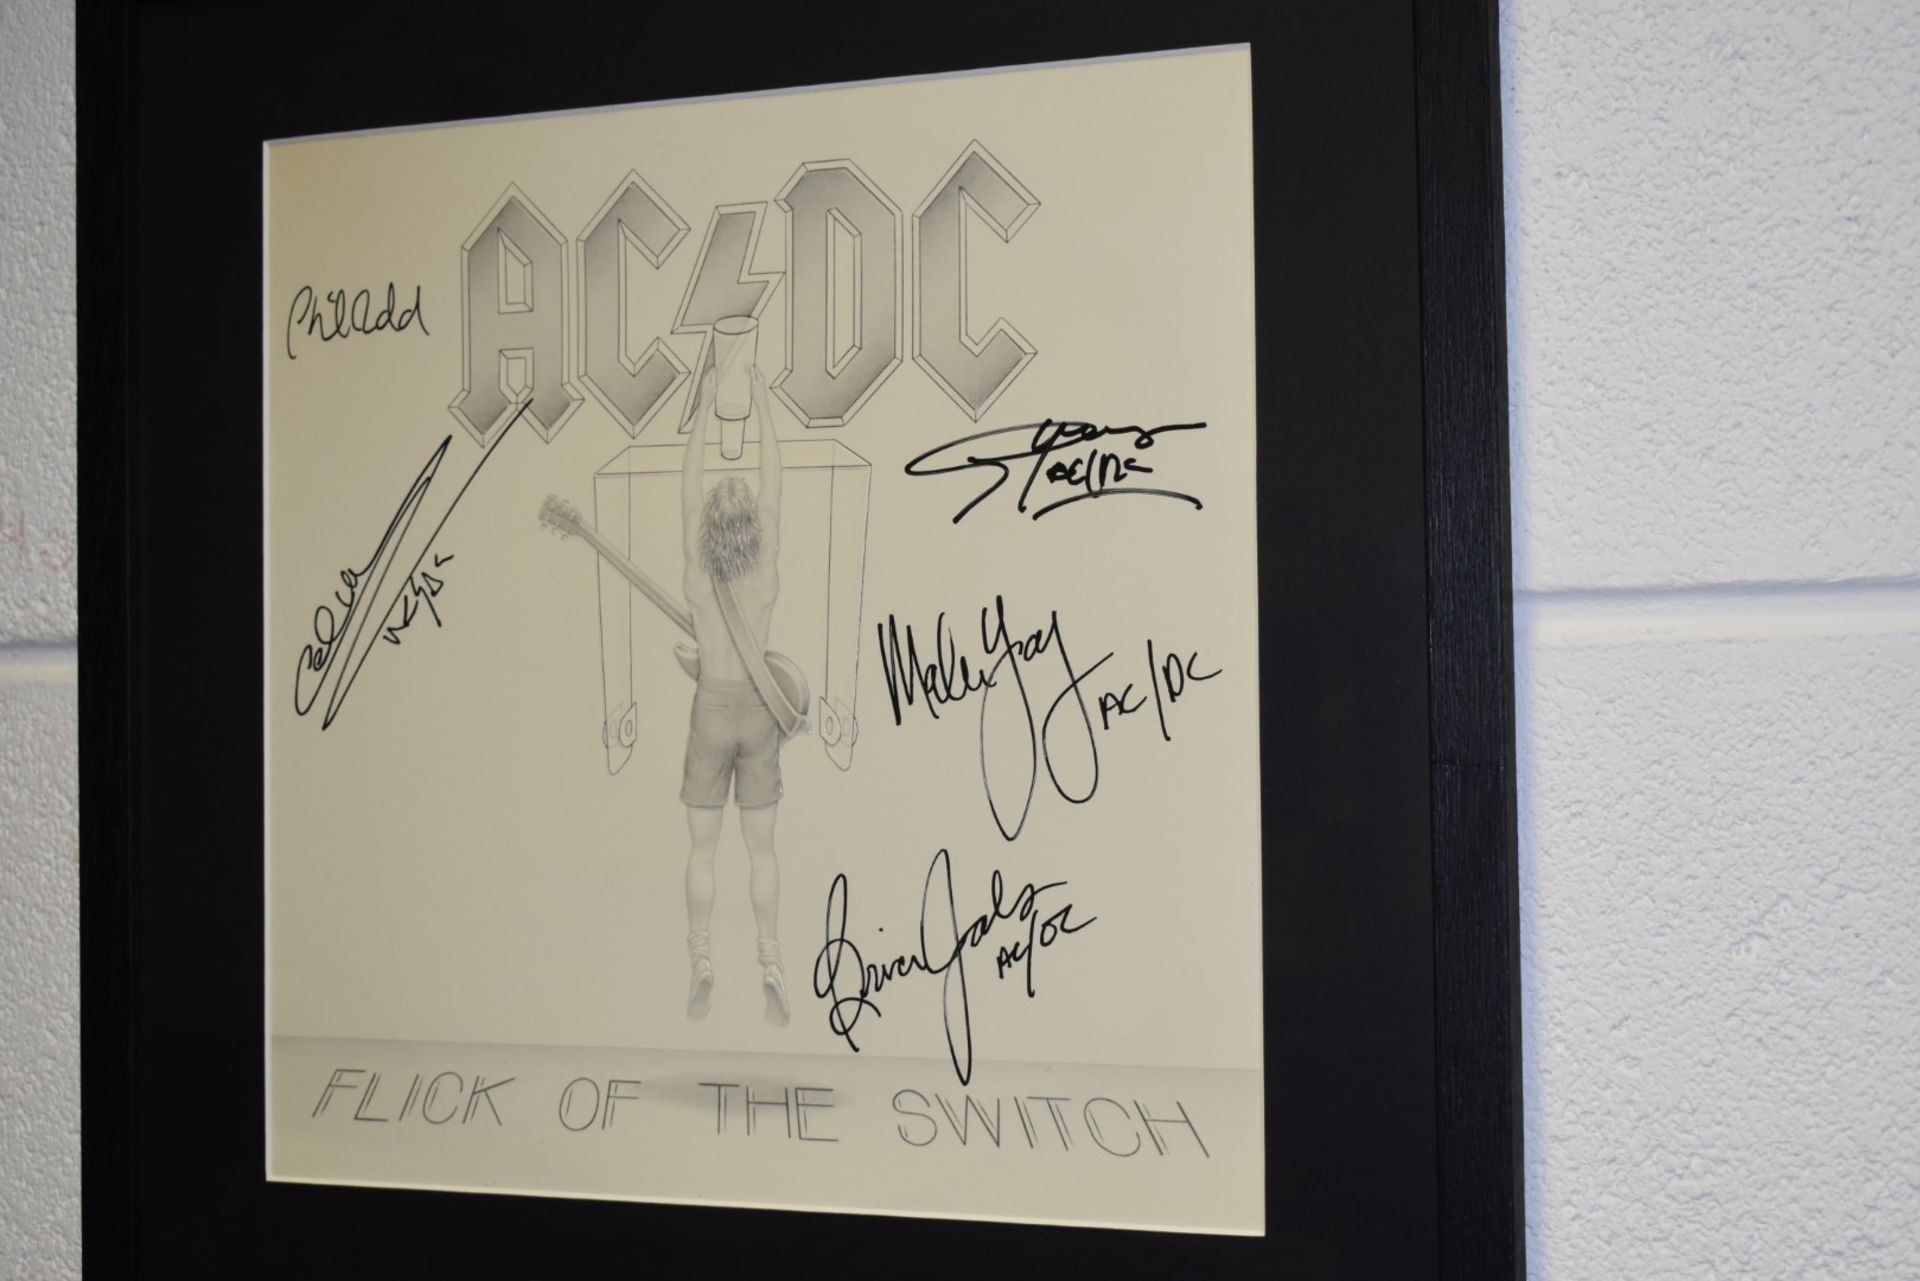 1 x Authentic AC/DC Autographs With COA - Flick of The Switch Album Cover Signed By Dave Evans, - Image 3 of 14